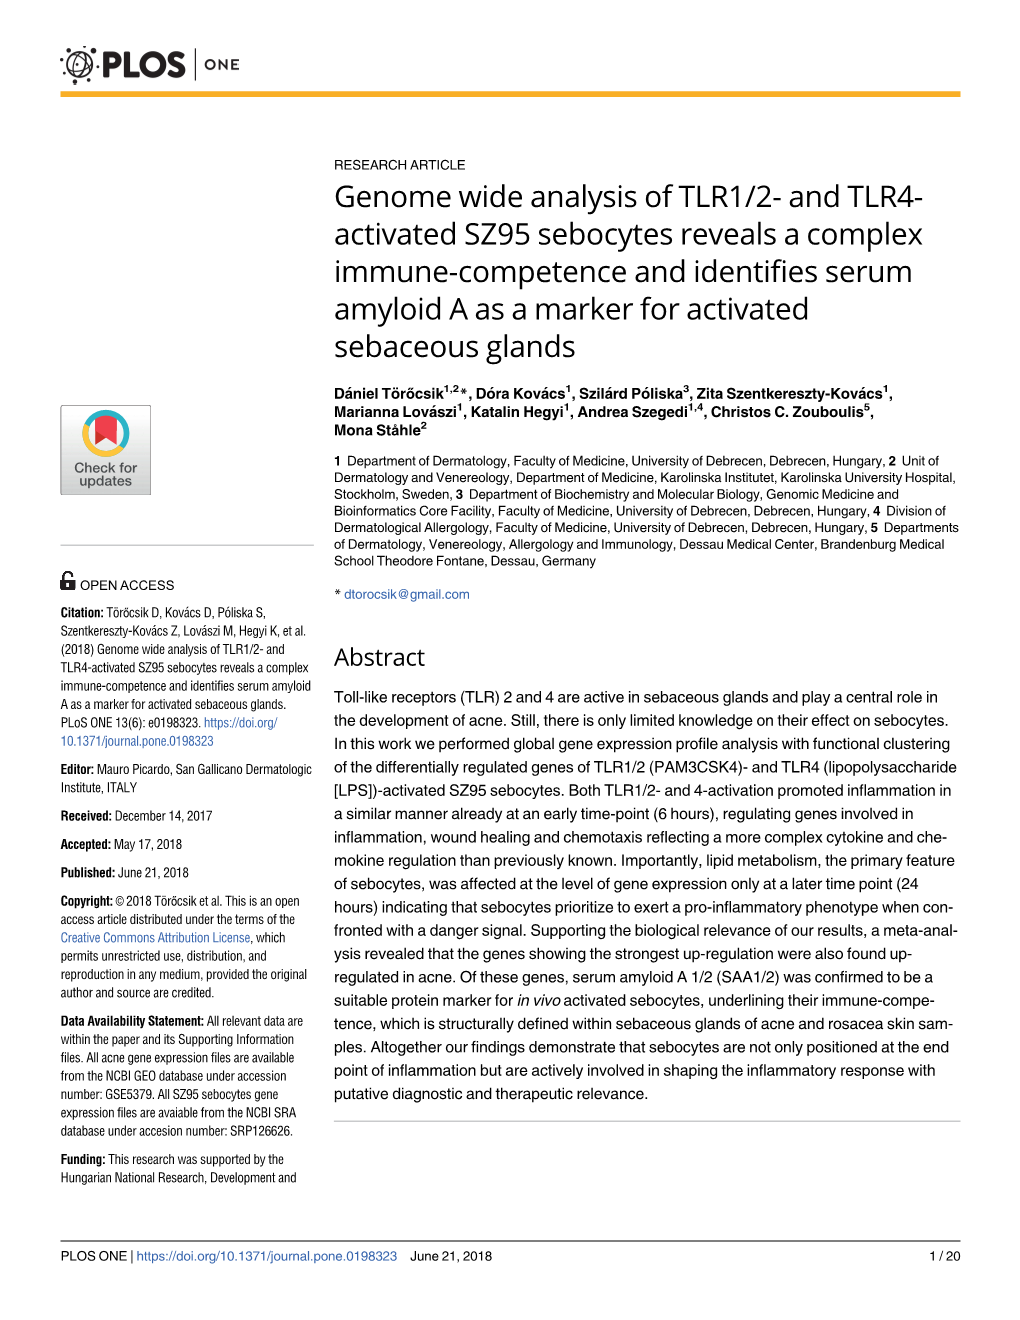 Genome Wide Analysis of TLR1/2- and TLR4-Activated SZ95 Sebocytes